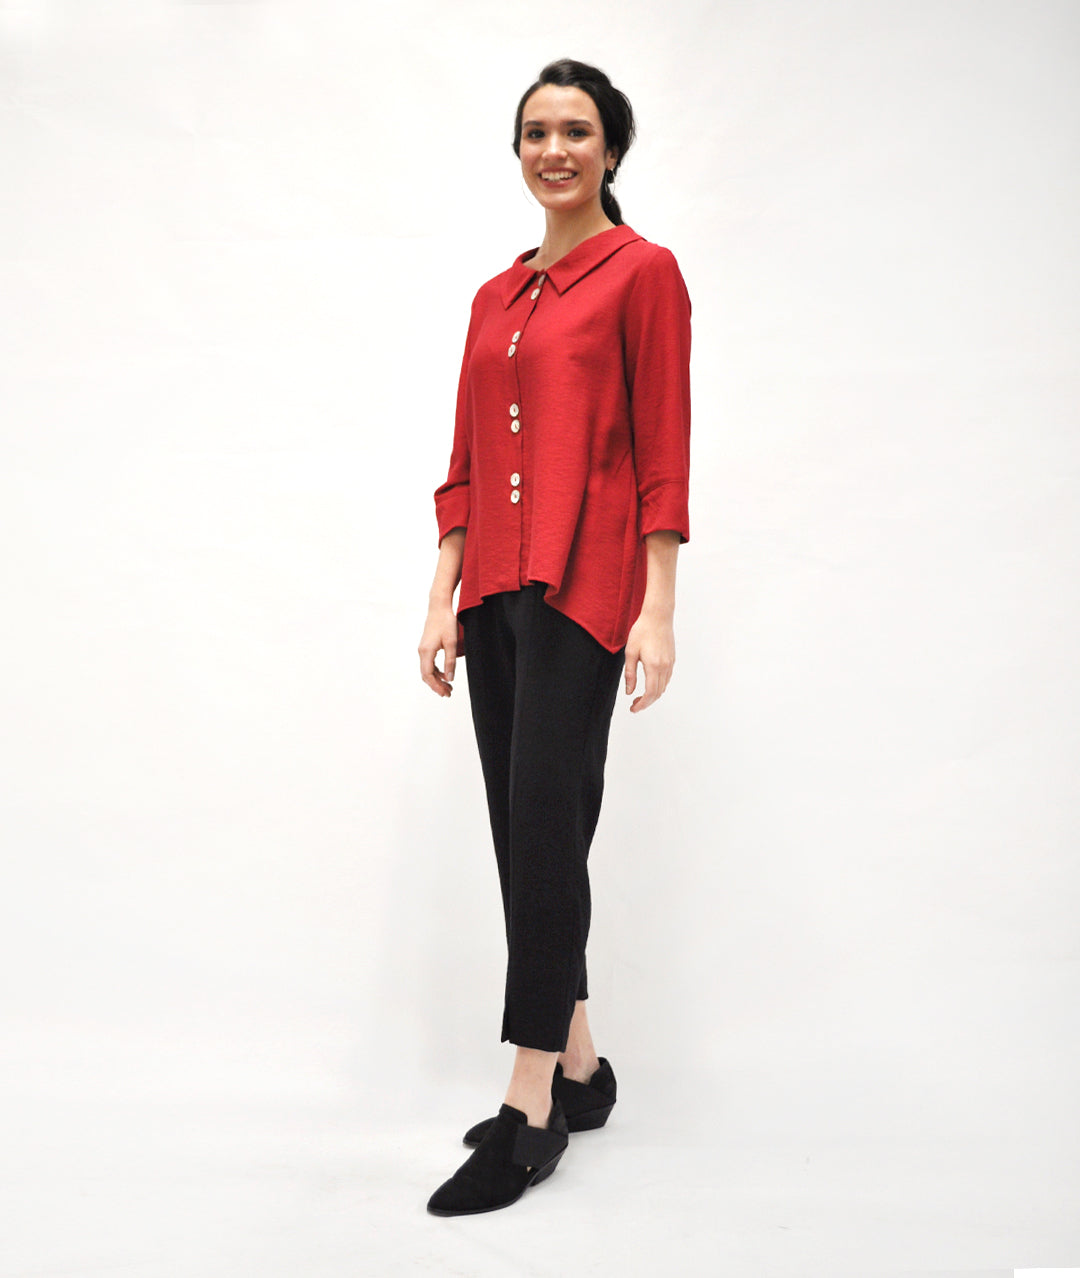 model in a slim black pant with a button up cranberry red blouse